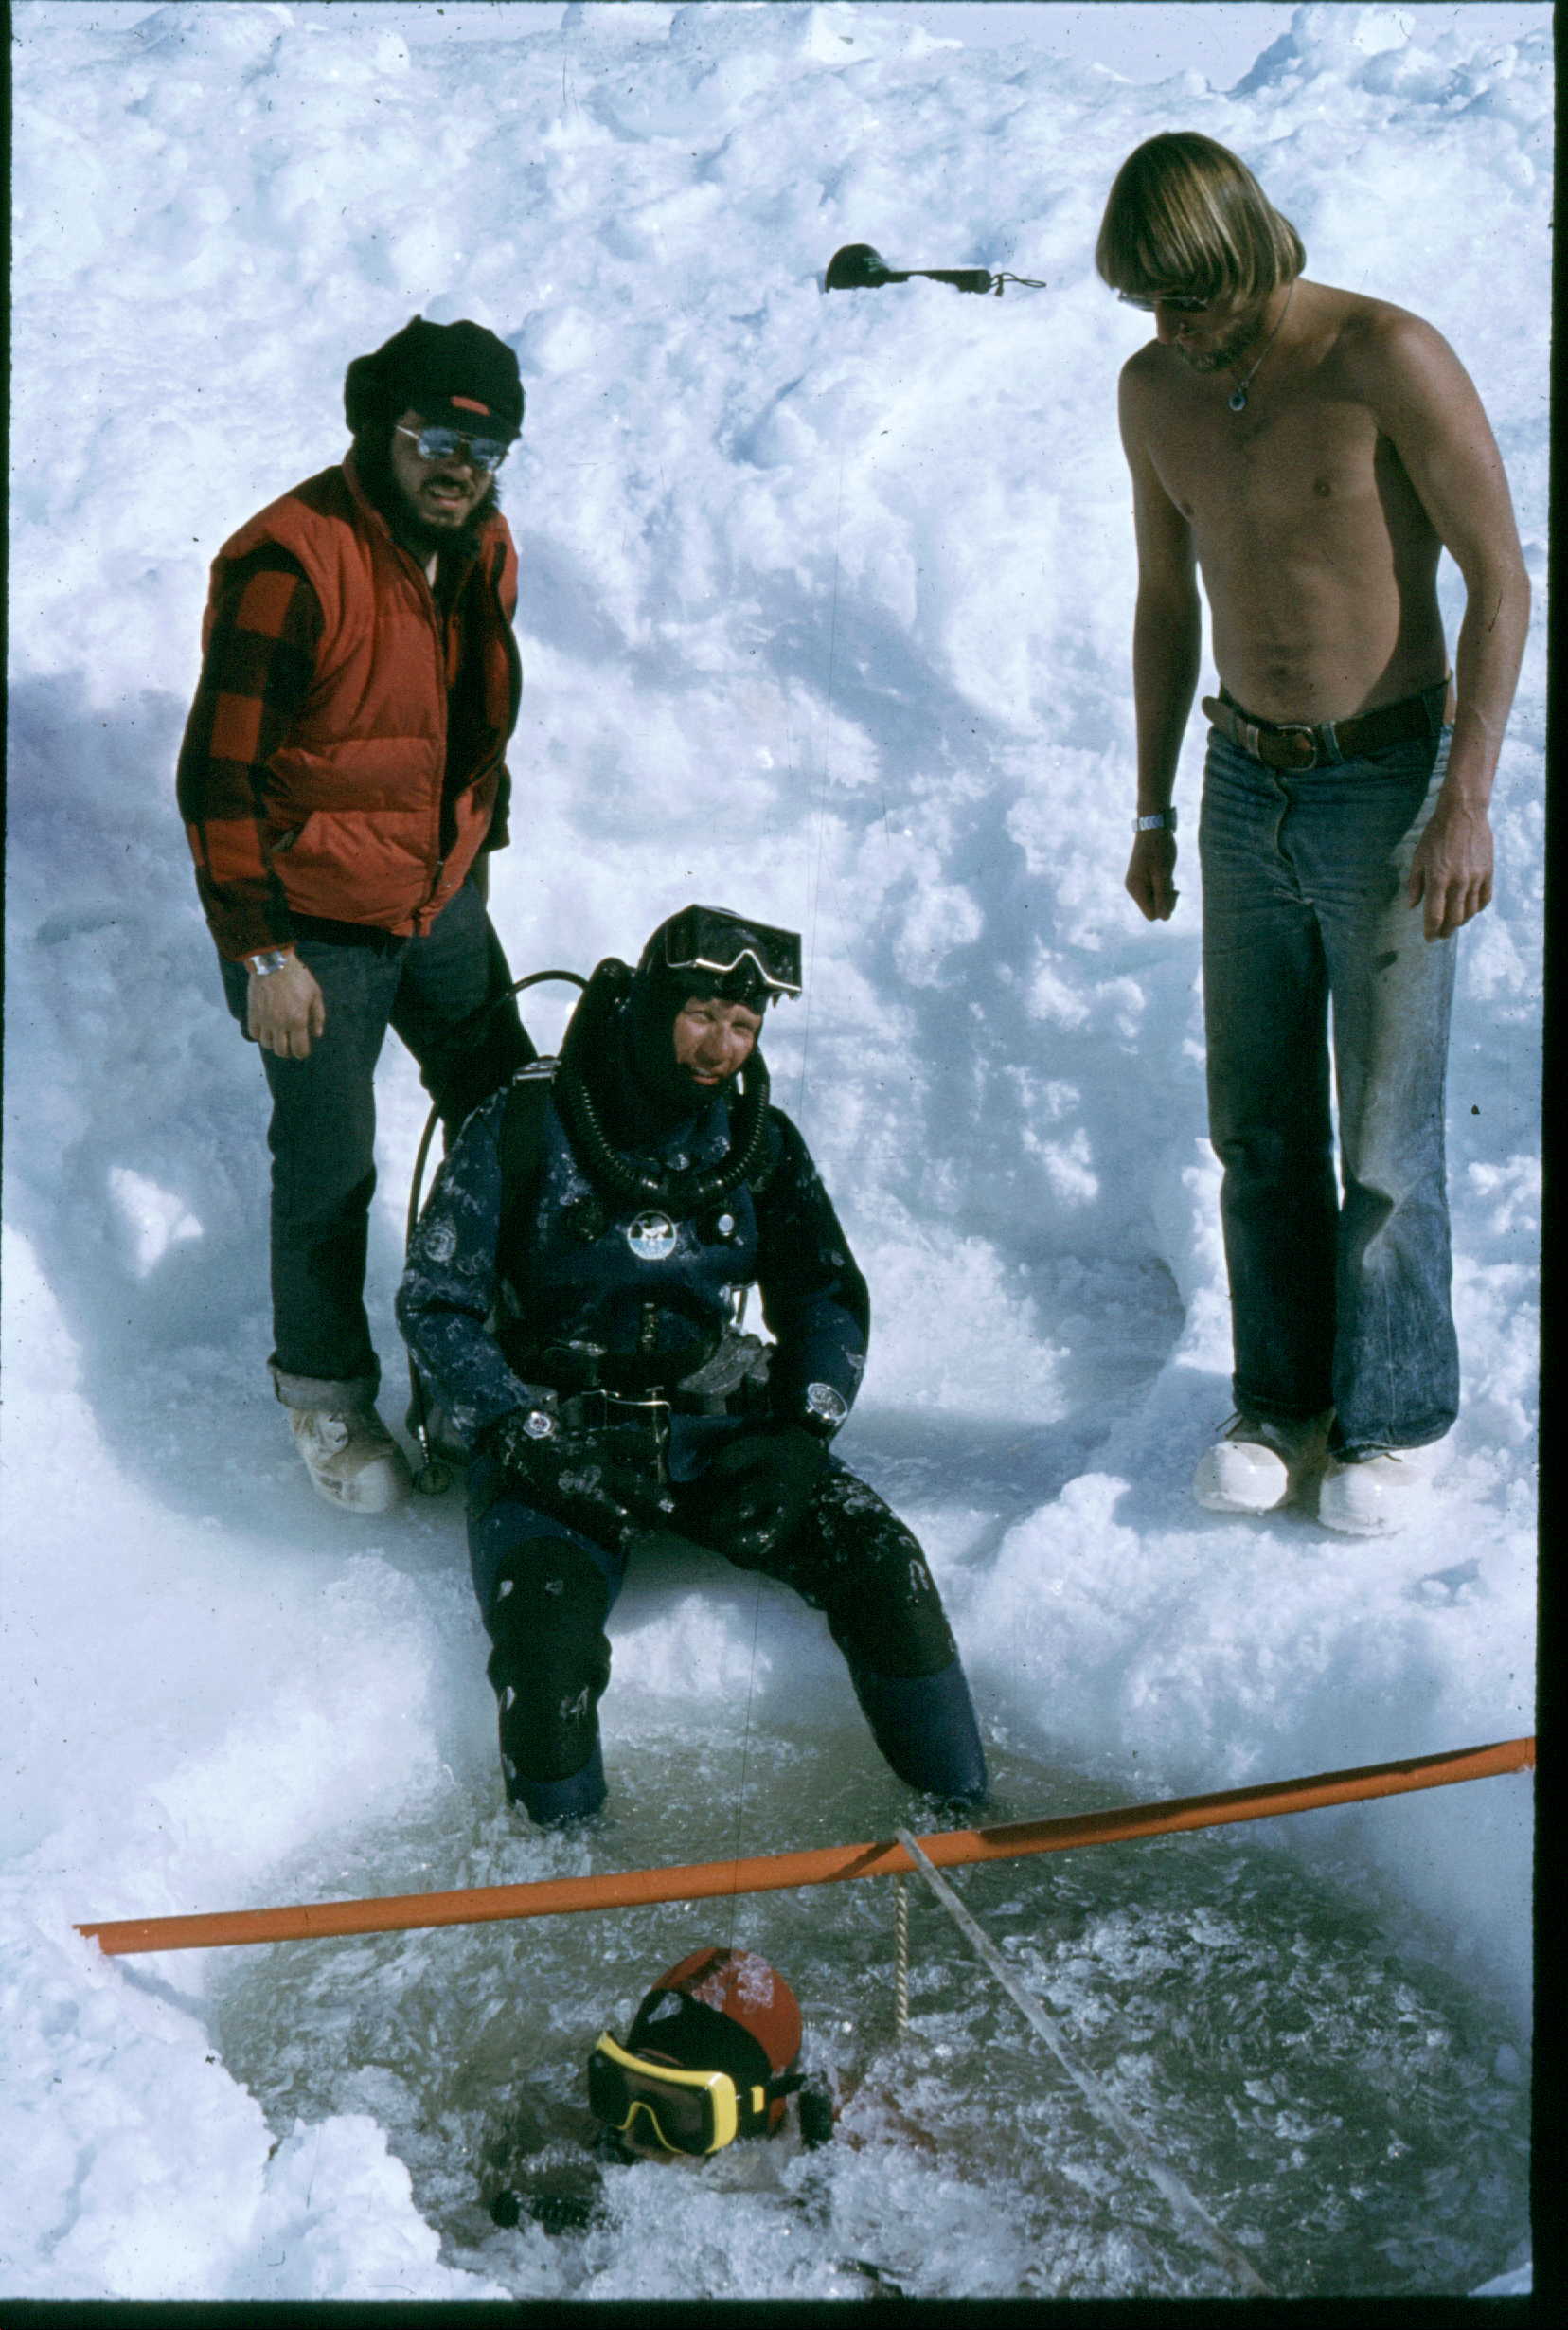 1978 diving expedition to observe Weddell seals under the ice. Dan Costa surfaces from a dive while Gerry Kooyman gets ready to submerge. Photo credit: Dan Costa.